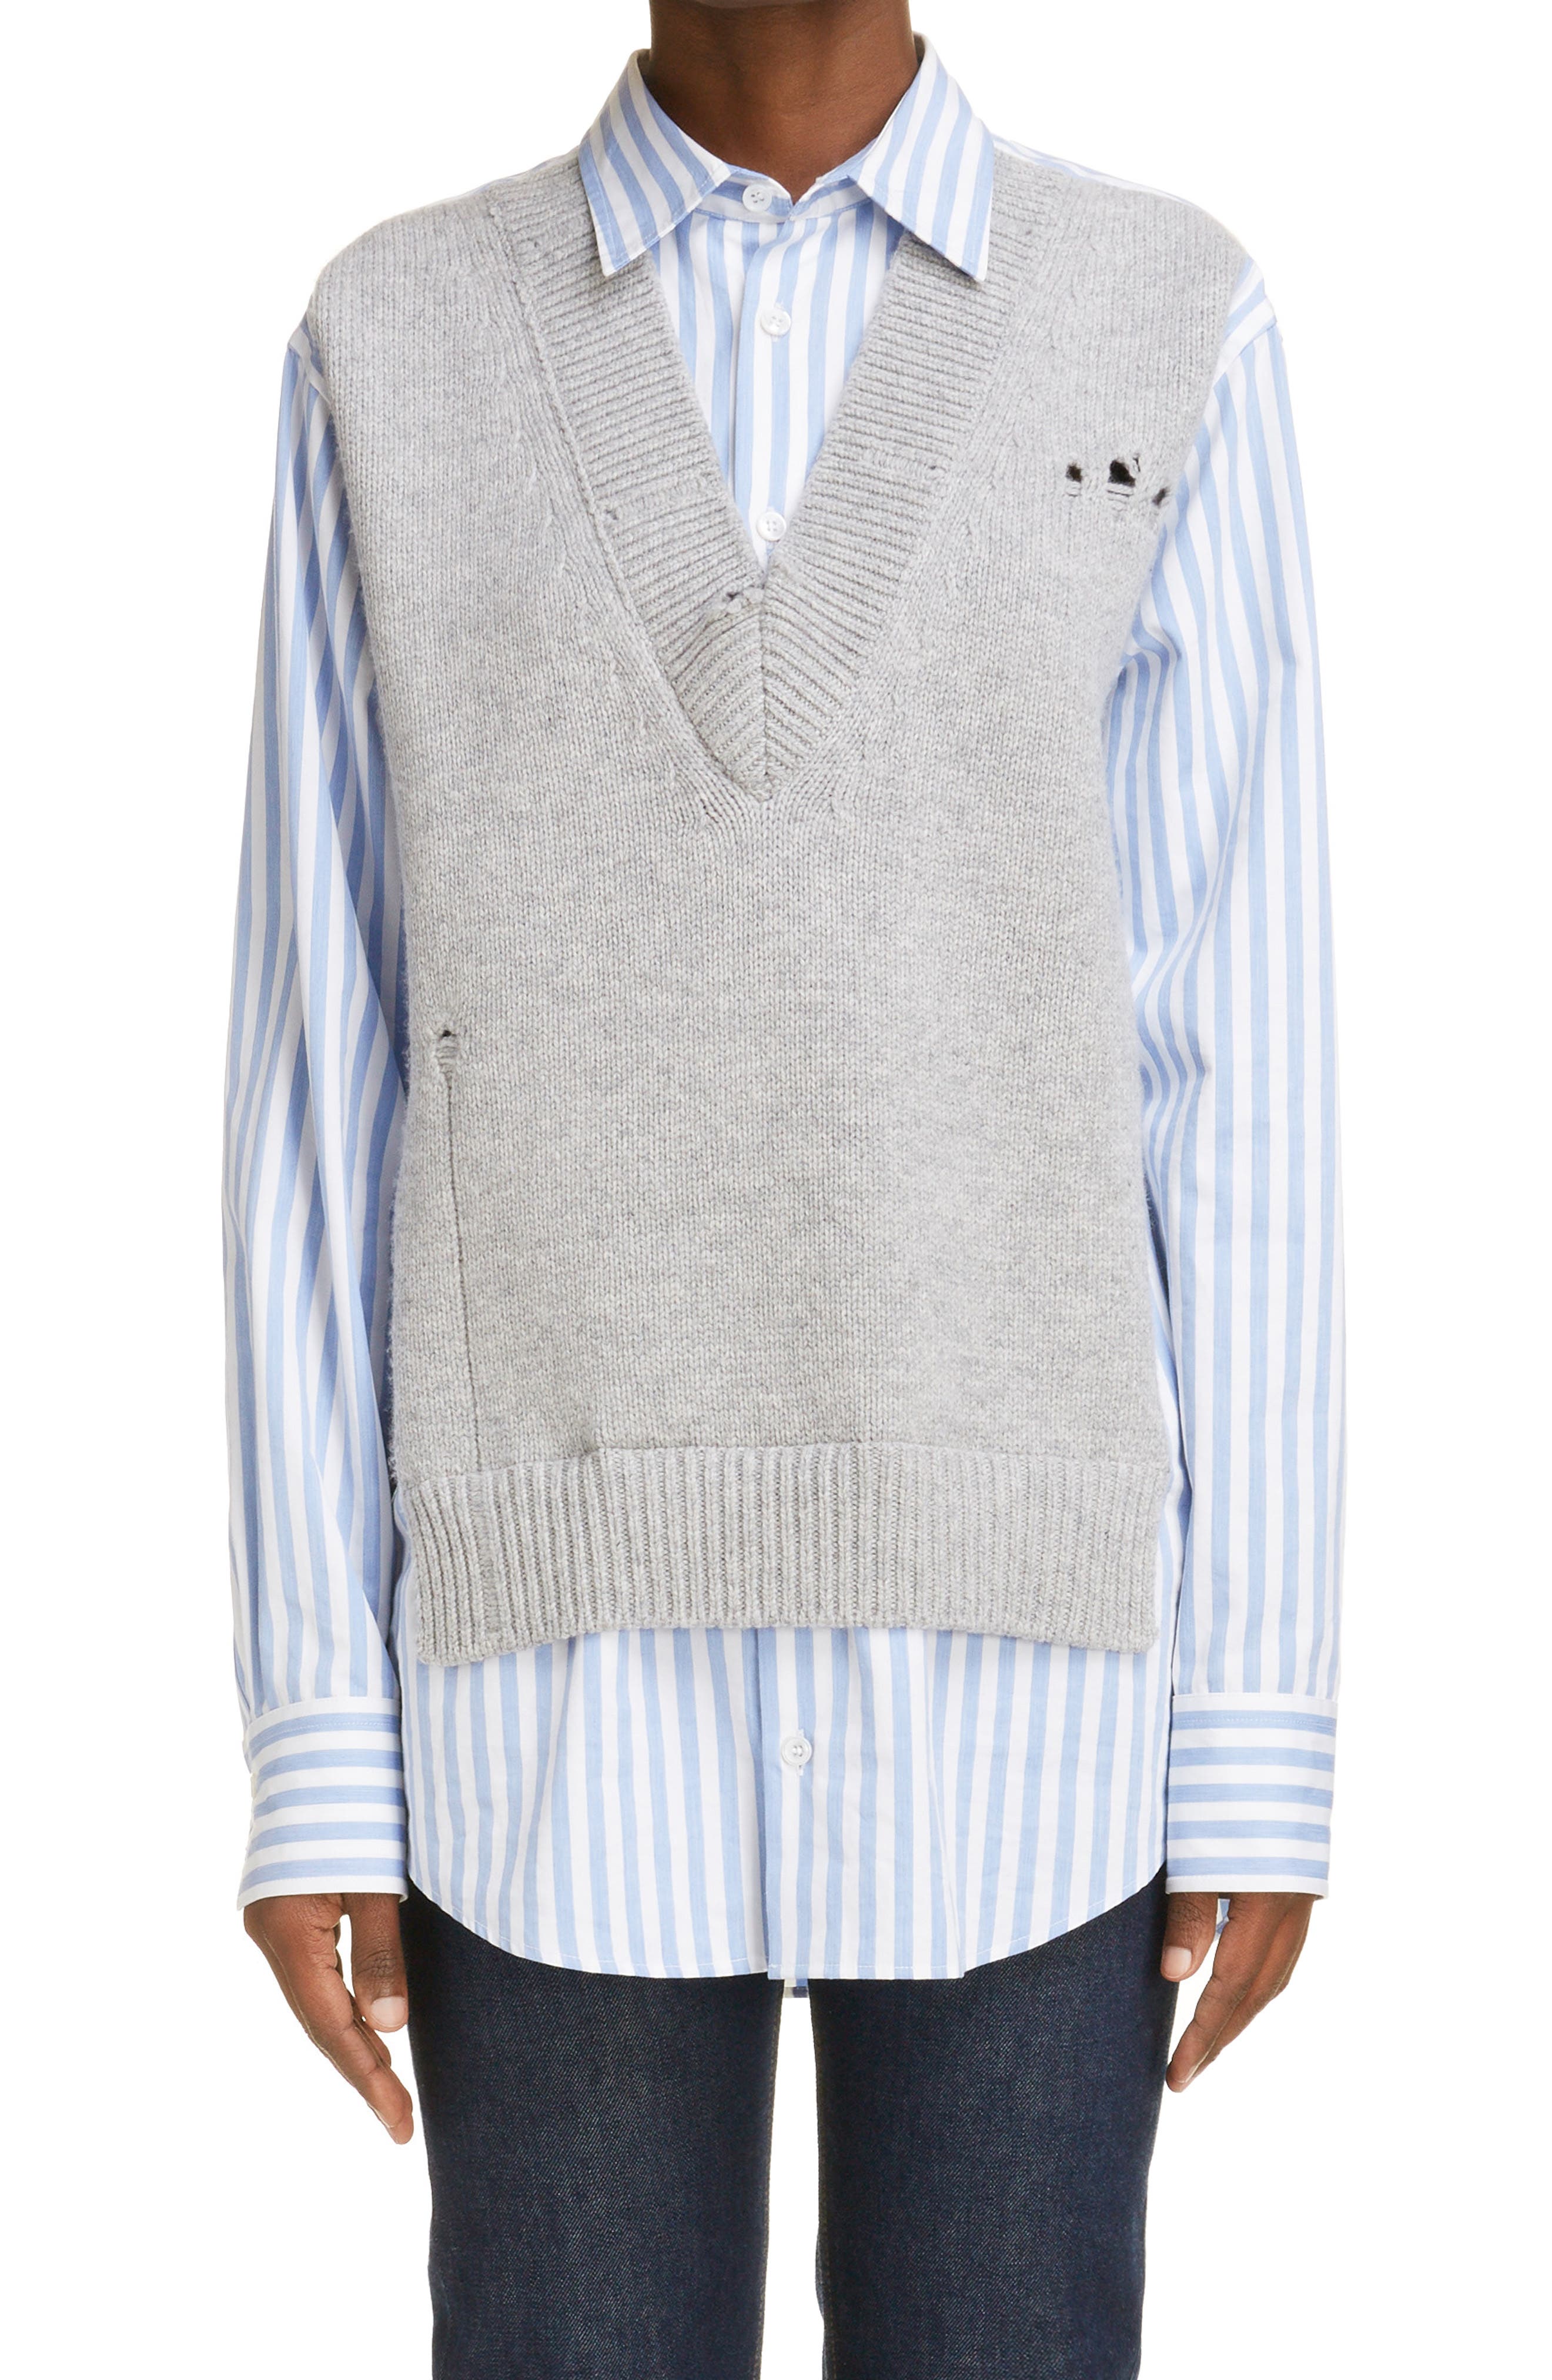 Maison Margiela Hybrid Wool Sweater Vest & Cotton Poplin Button-Up Shirt in Stripe White And Sky at Nordstrom